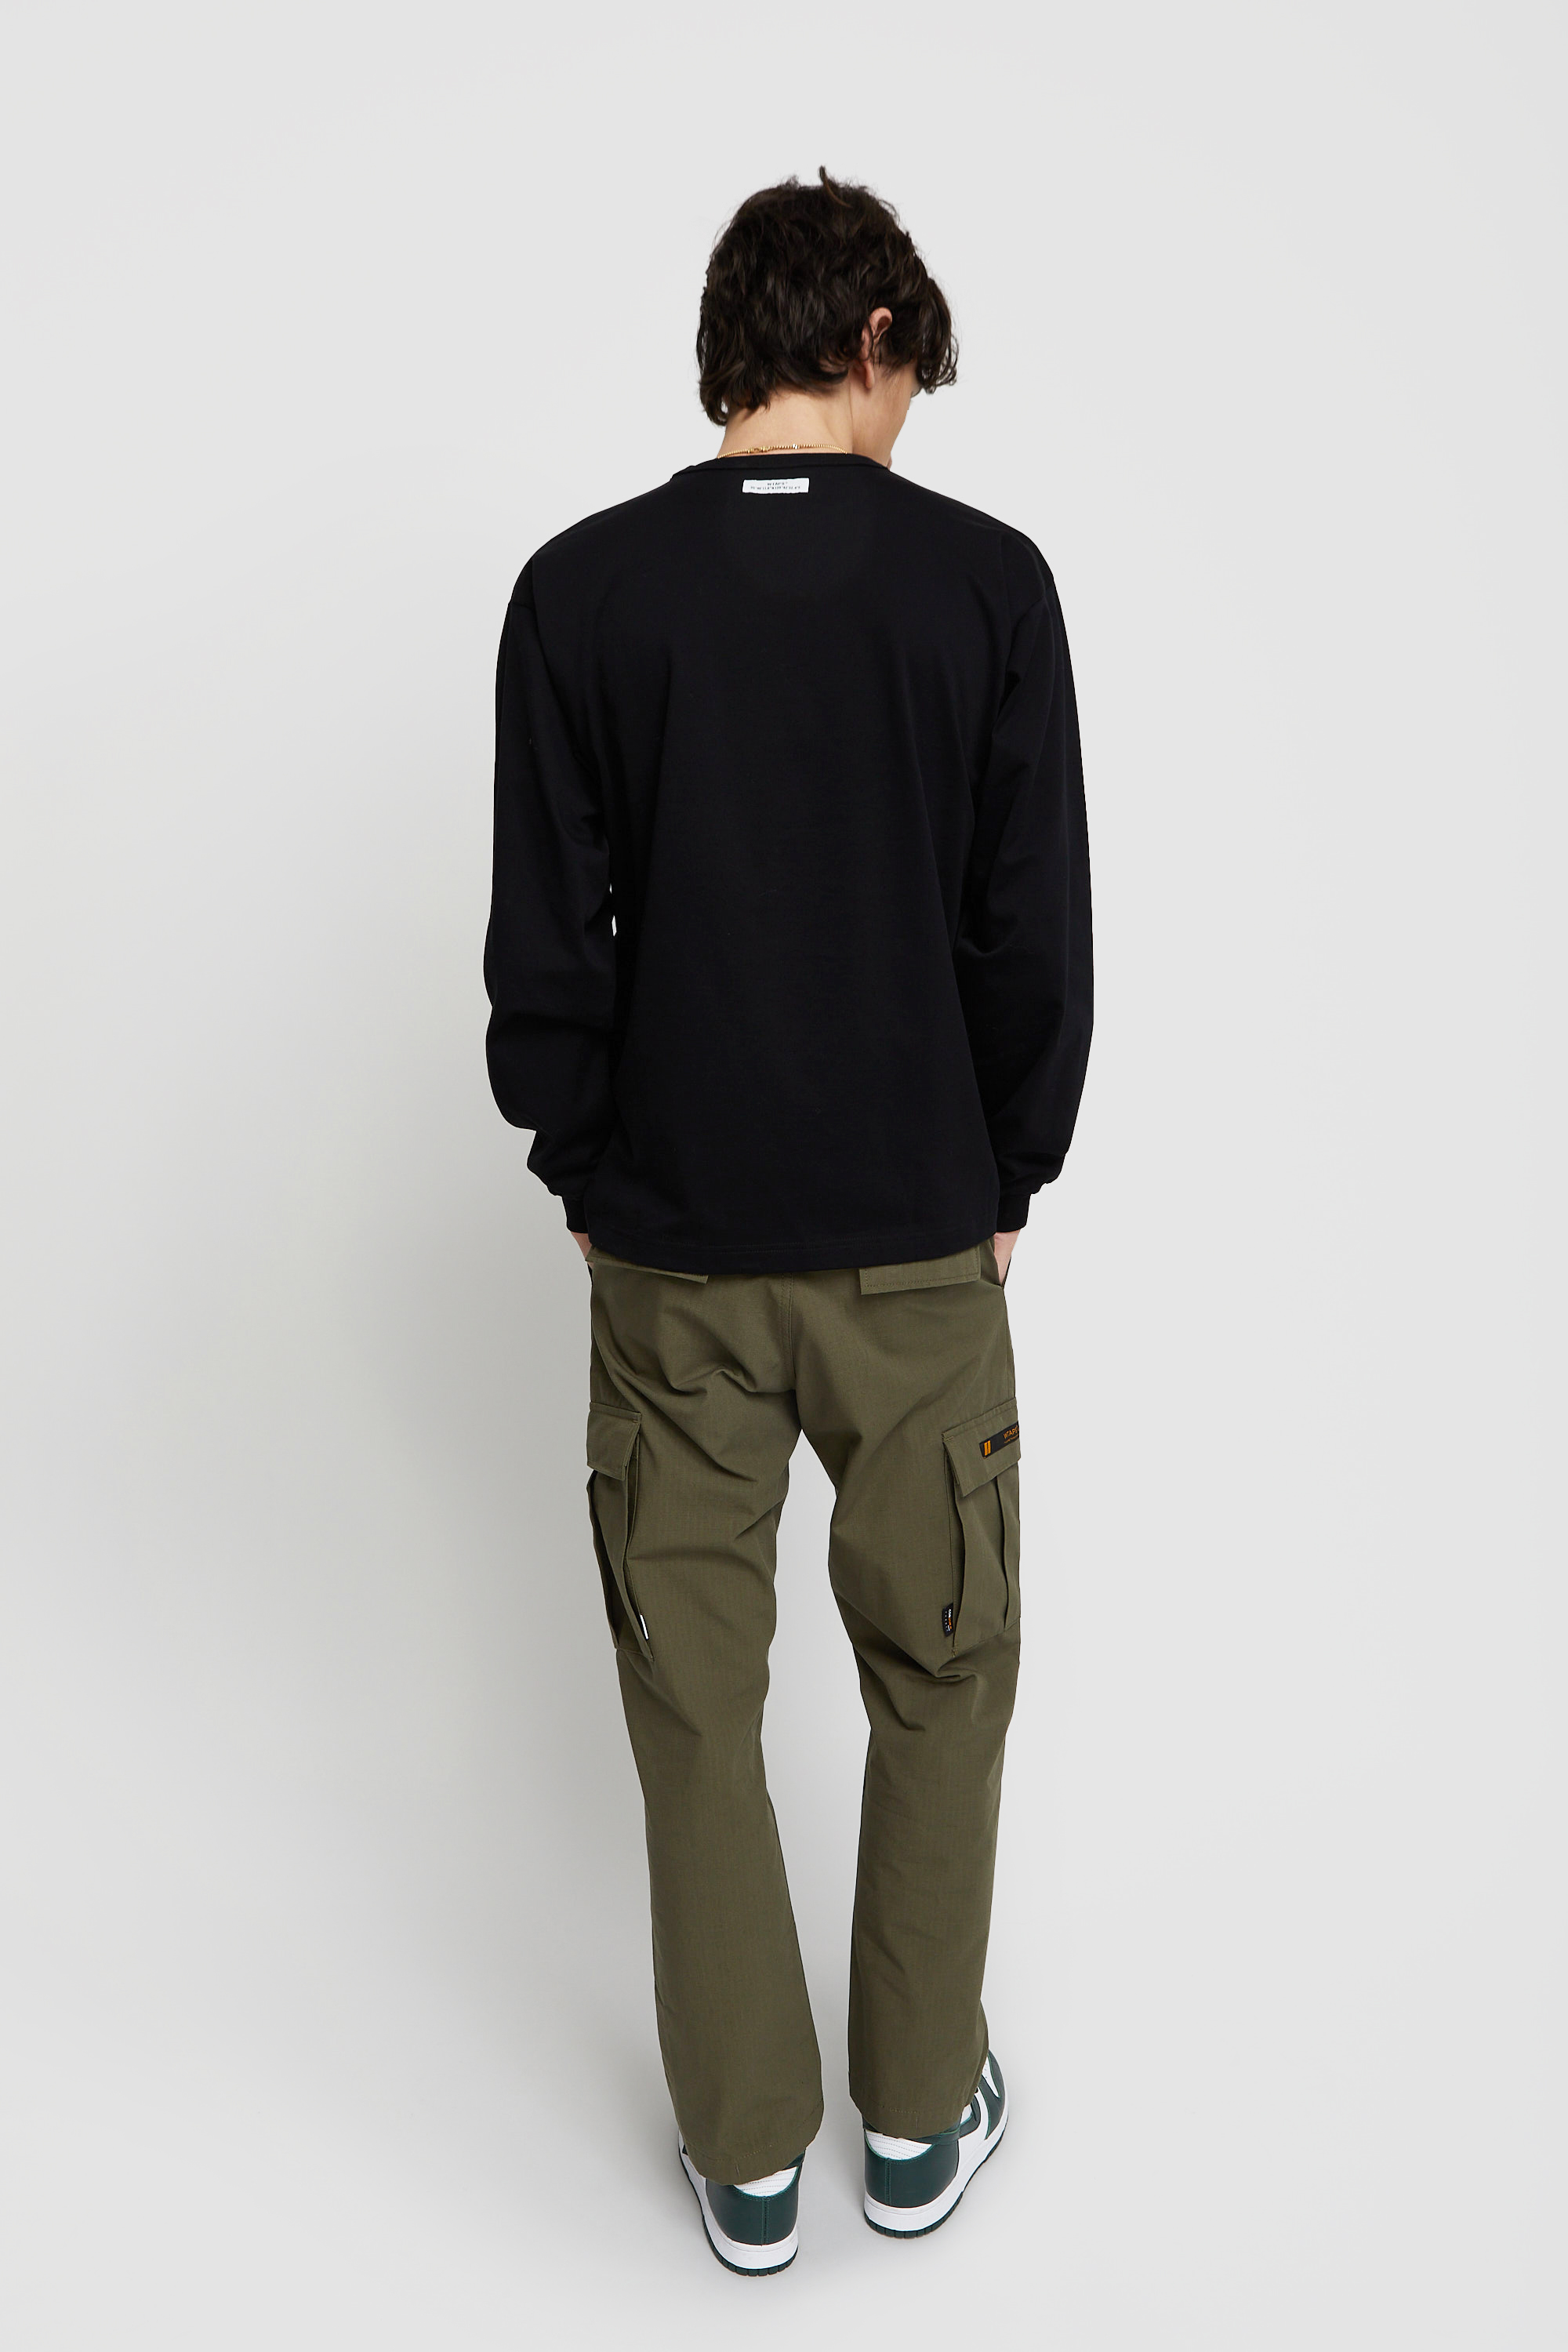 WTAPS Jungle Stock / Trousers. Nyco. Olive drab | WoodWood.com